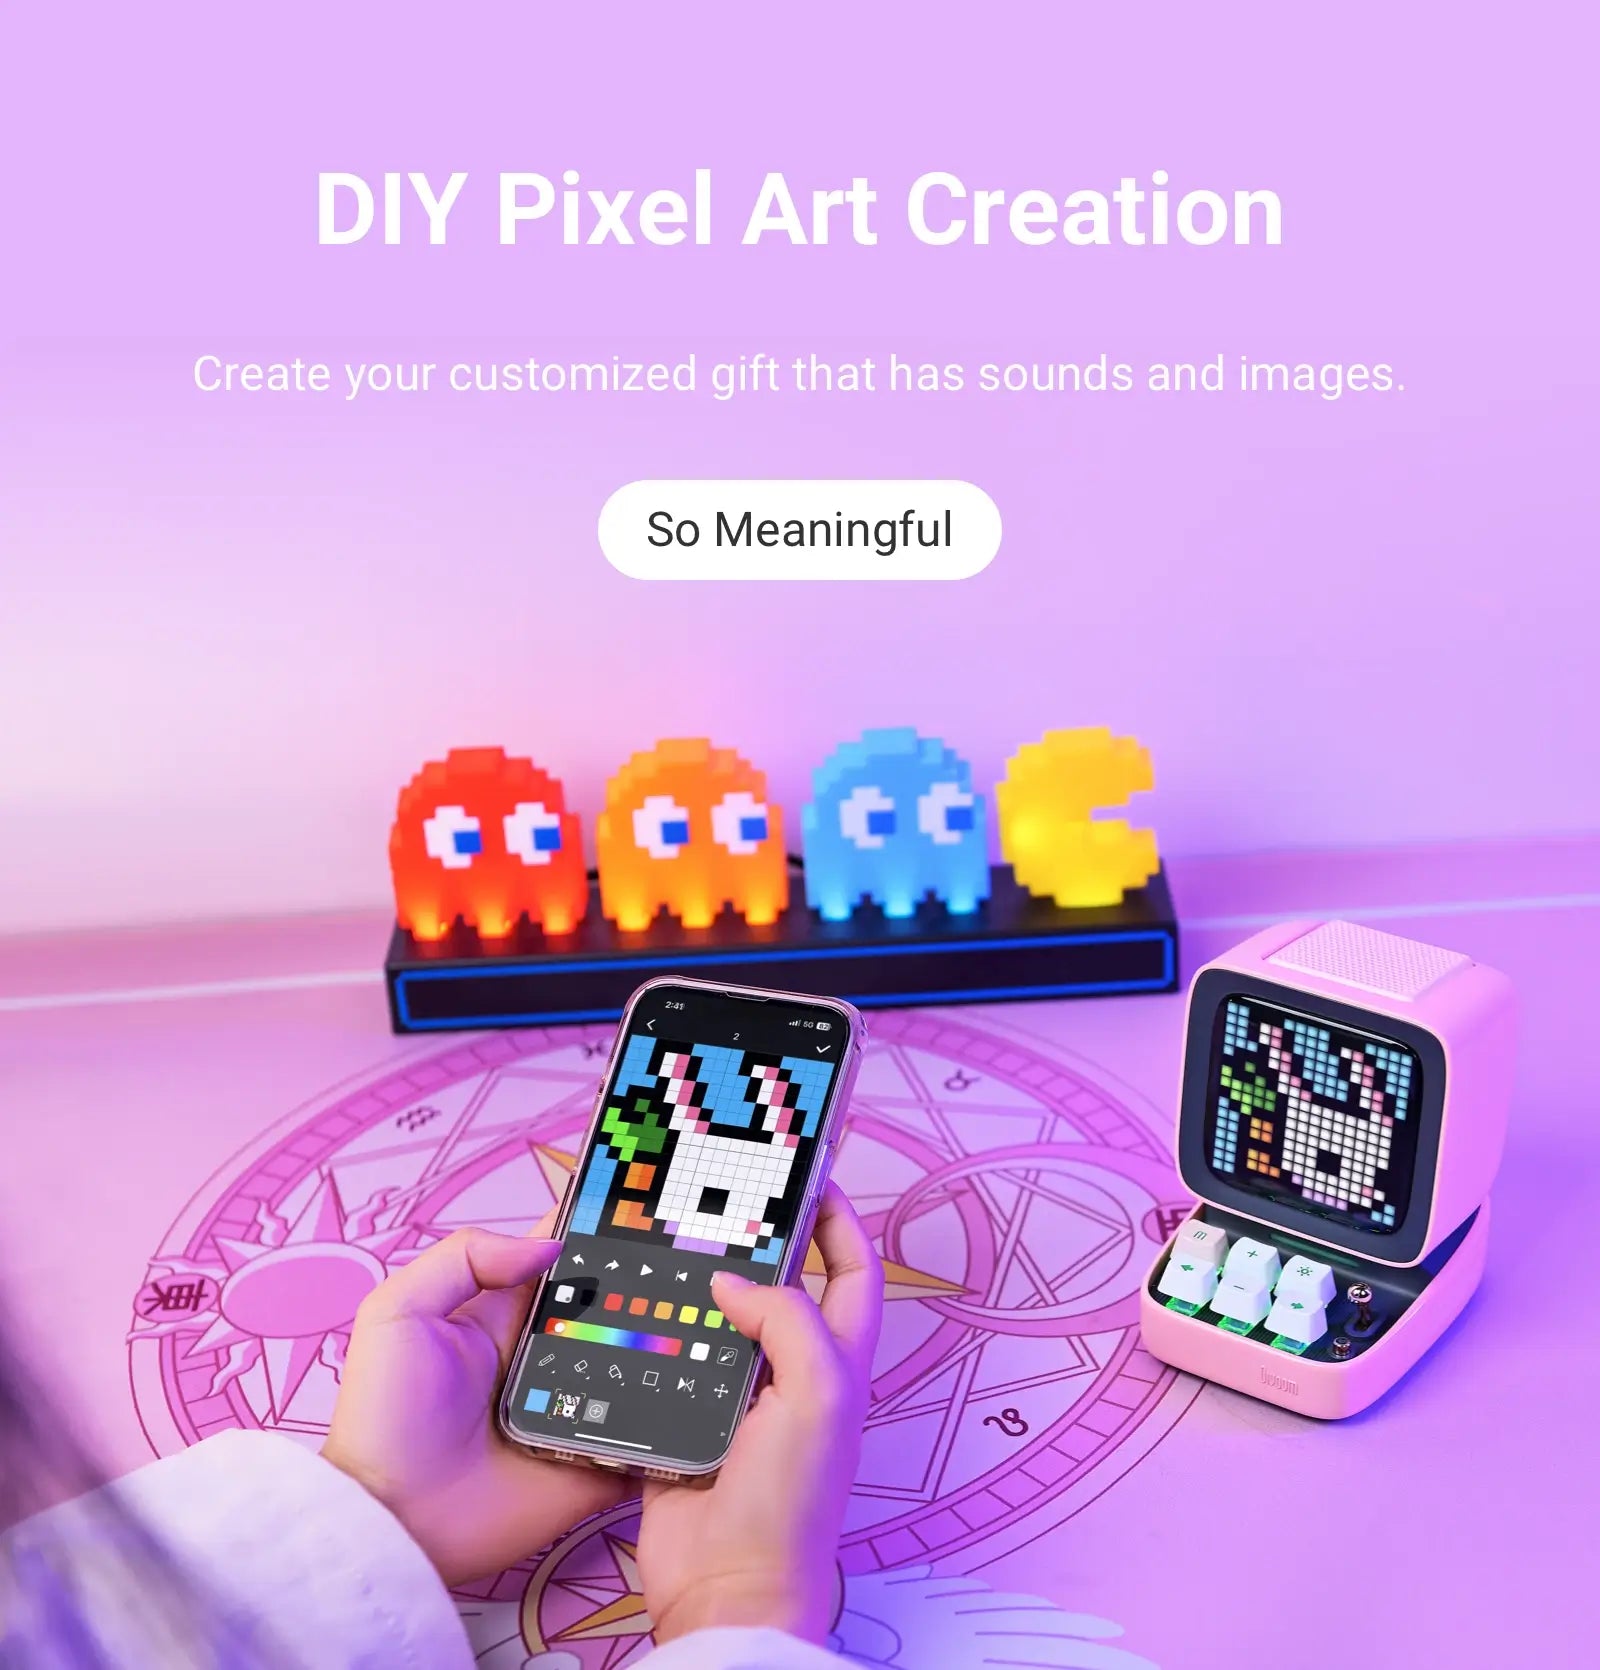 - So Meaningful | DIY Pixel Art Drawing - 说明：Create your customized gift that has sounds and images.